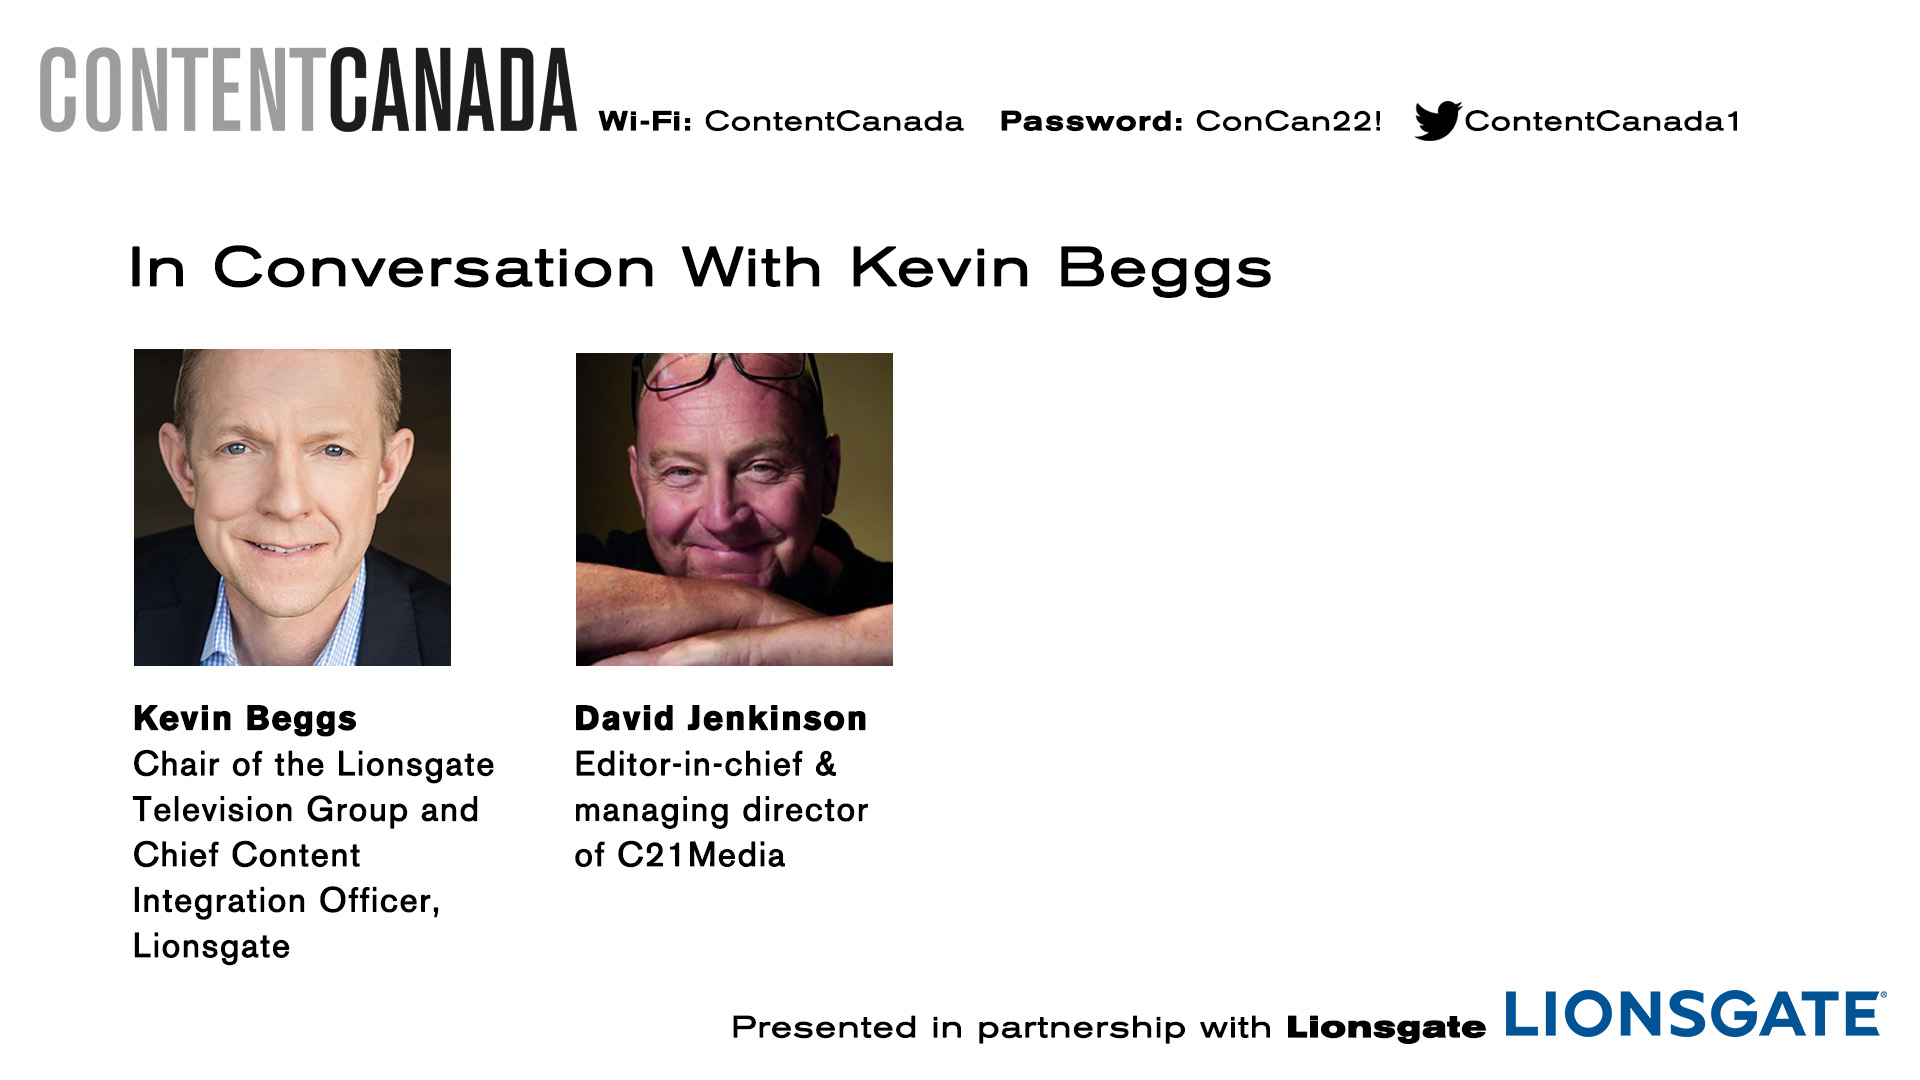 In Conversation With Kevin Beggs